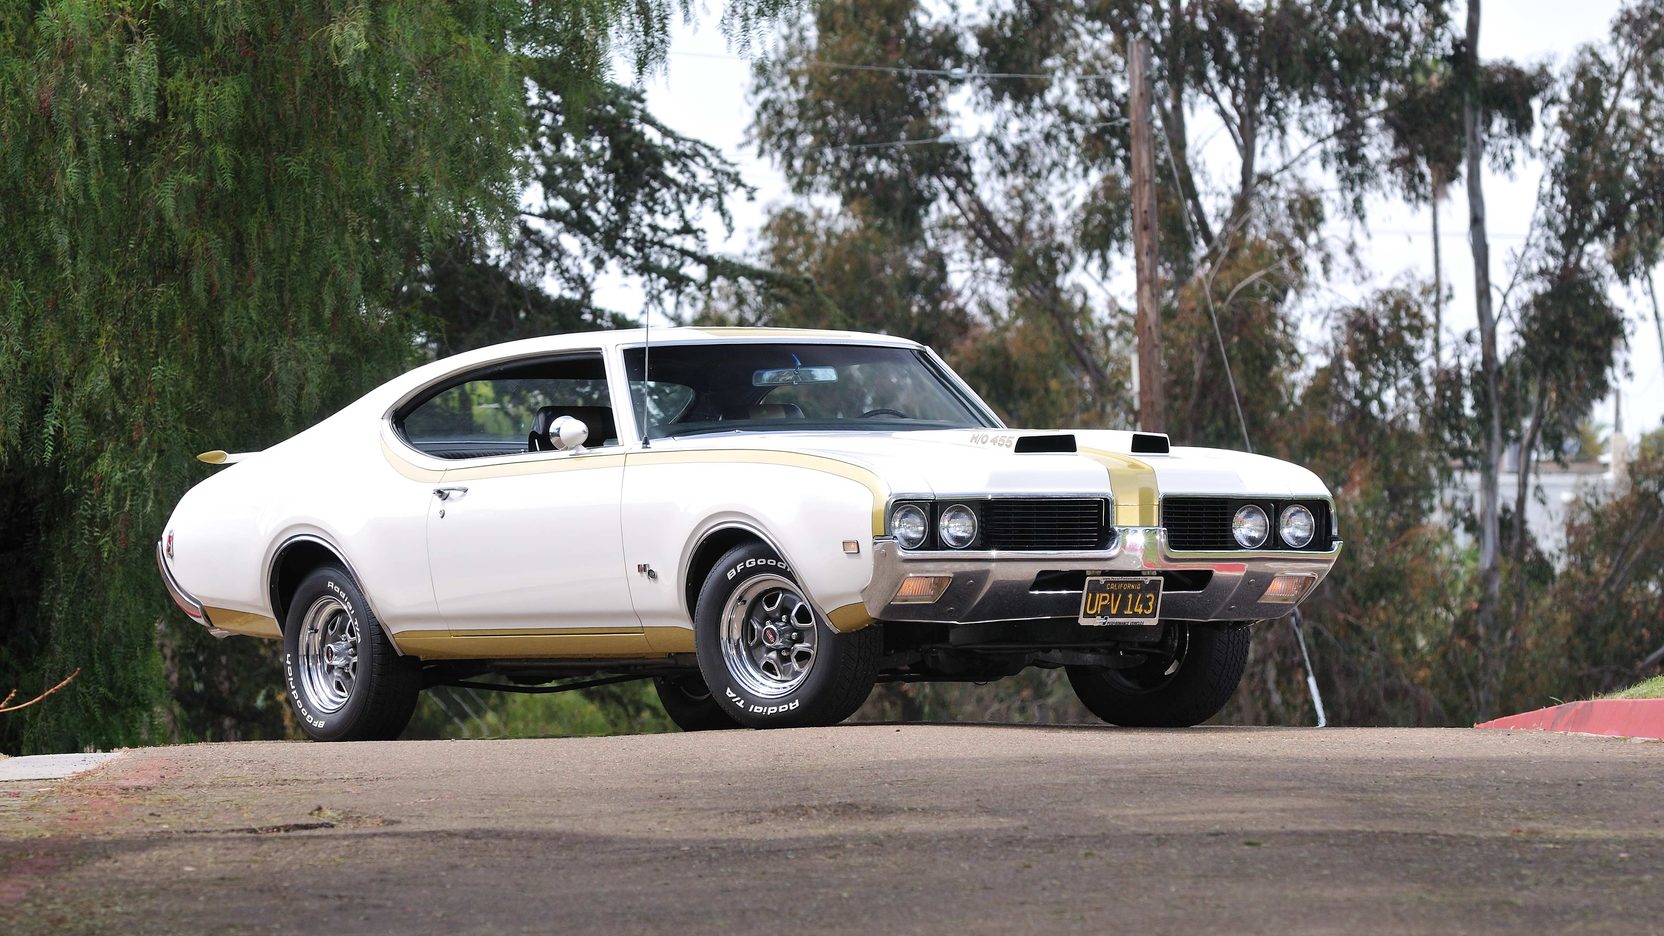 Amazing Oldsmobile 442 Hurst Pictures & Backgrounds